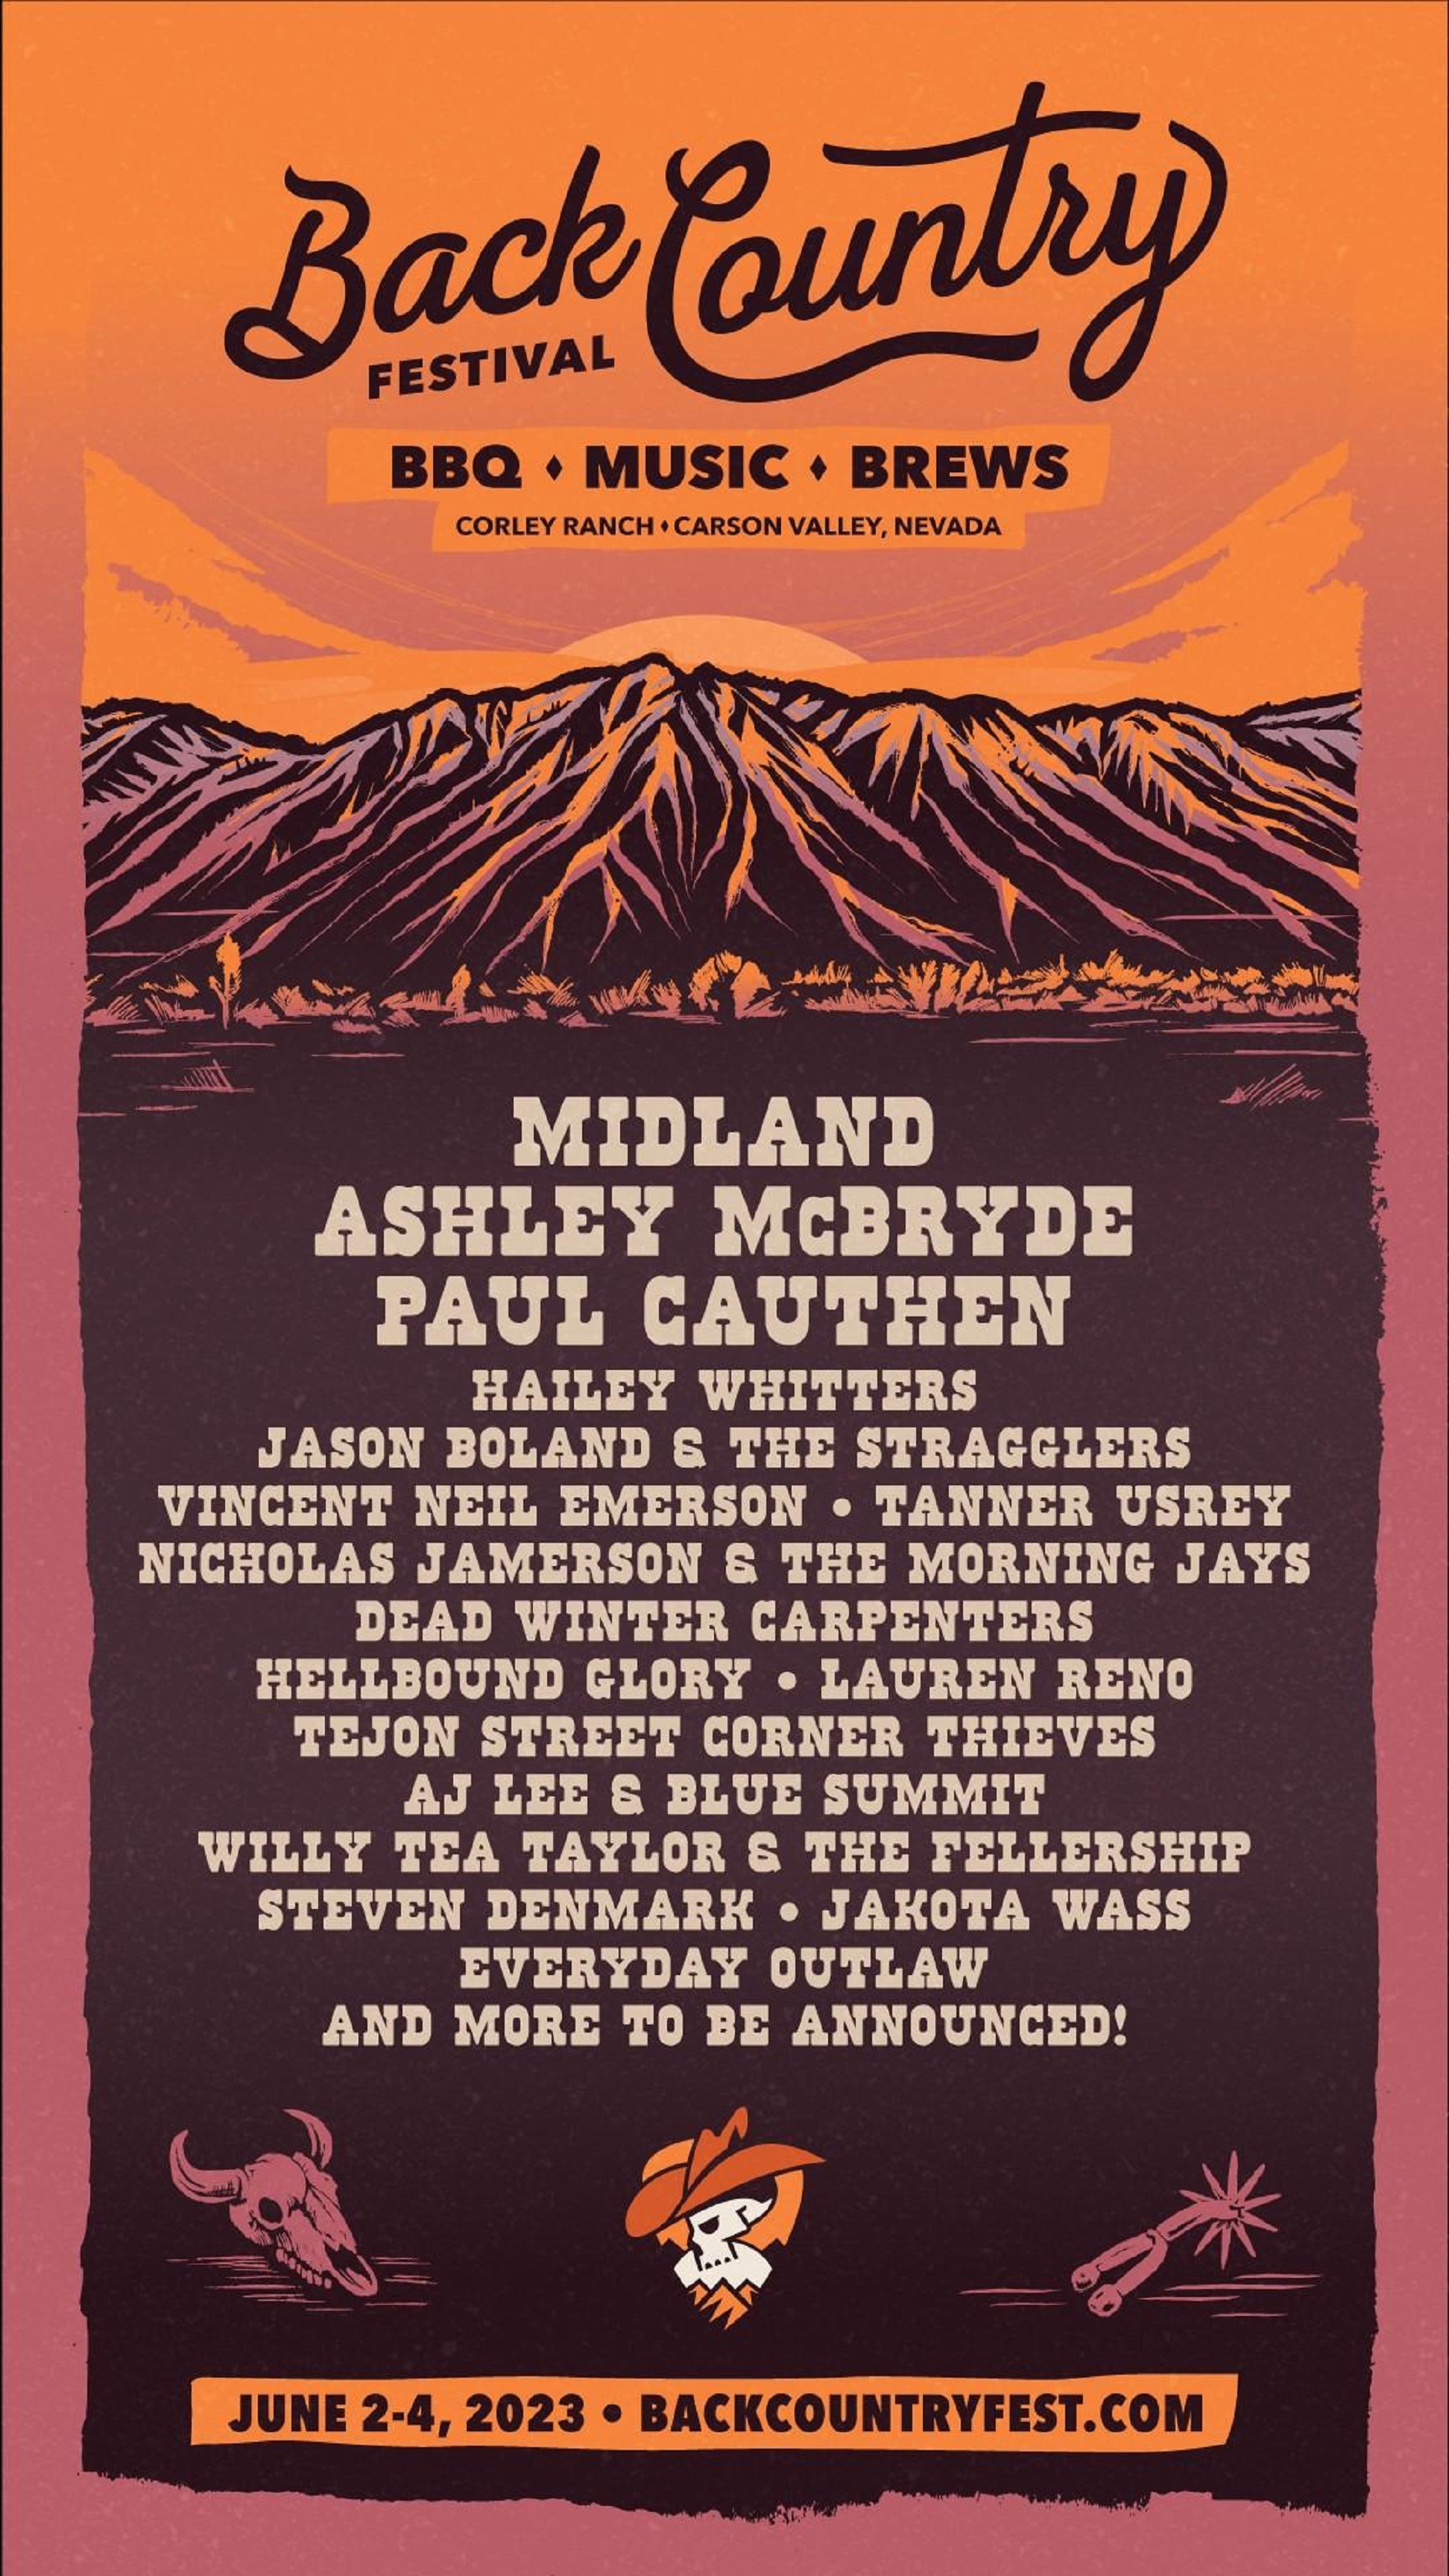 BACKCOUNTRY FESTIVAL ANNOUNCES STELLAR ARTIST LINEUP FOR INAUGURAL EVENT